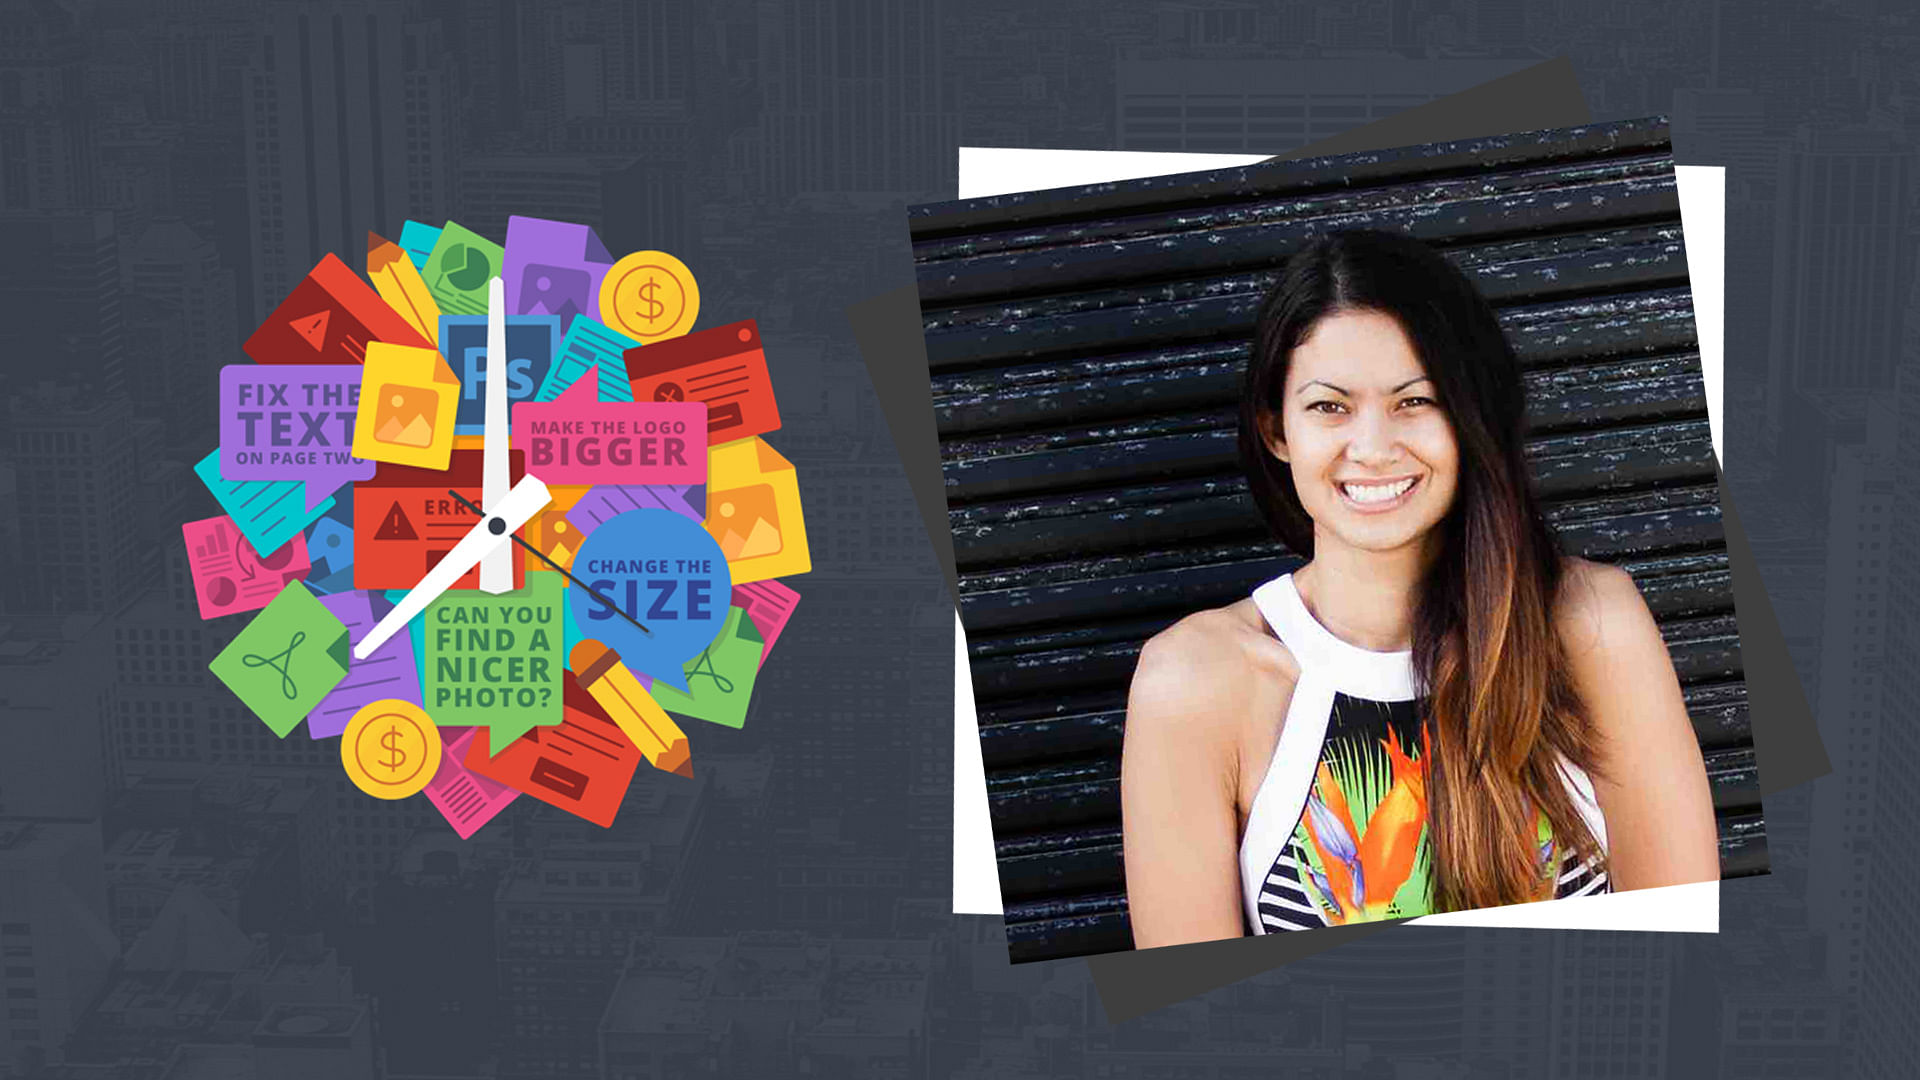 Canva’s Founder &amp; CEO, Melanie Perkins interacted with The Quint.